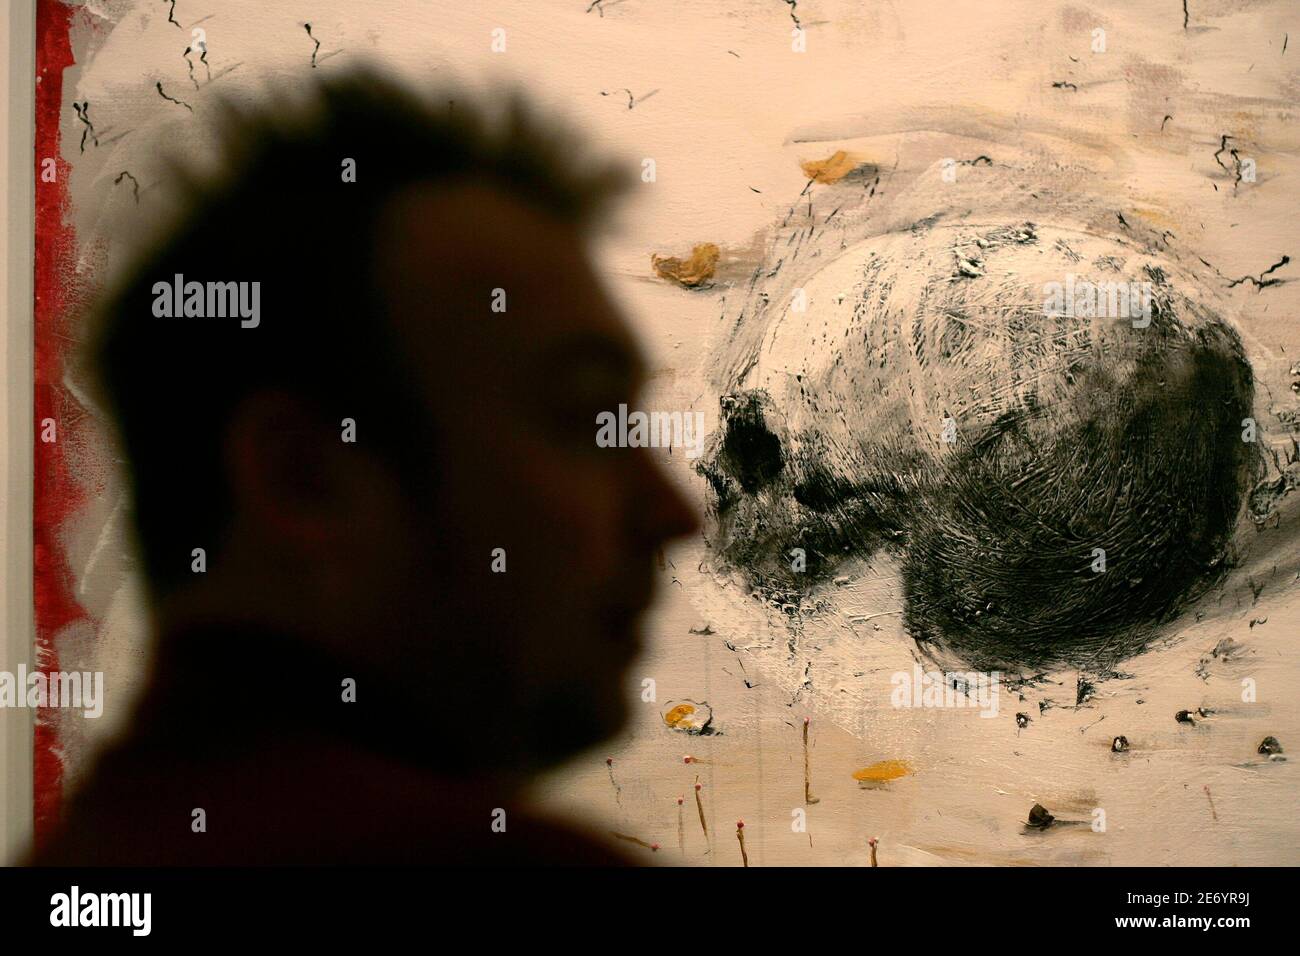 Spanish artist Miquel Barcelo is silhouetted next to his work 'Crane aux Allumettes' during the media preview of his exhibition entitled 'Obra Africana' ('African work') at the Contemporary Art Center in Malaga, southern Spain November 11, 2008. Barcelo' s exhibit will run until February 15, 2009. REUTERS/Jon Nazca (SPAIN) Stock Photo